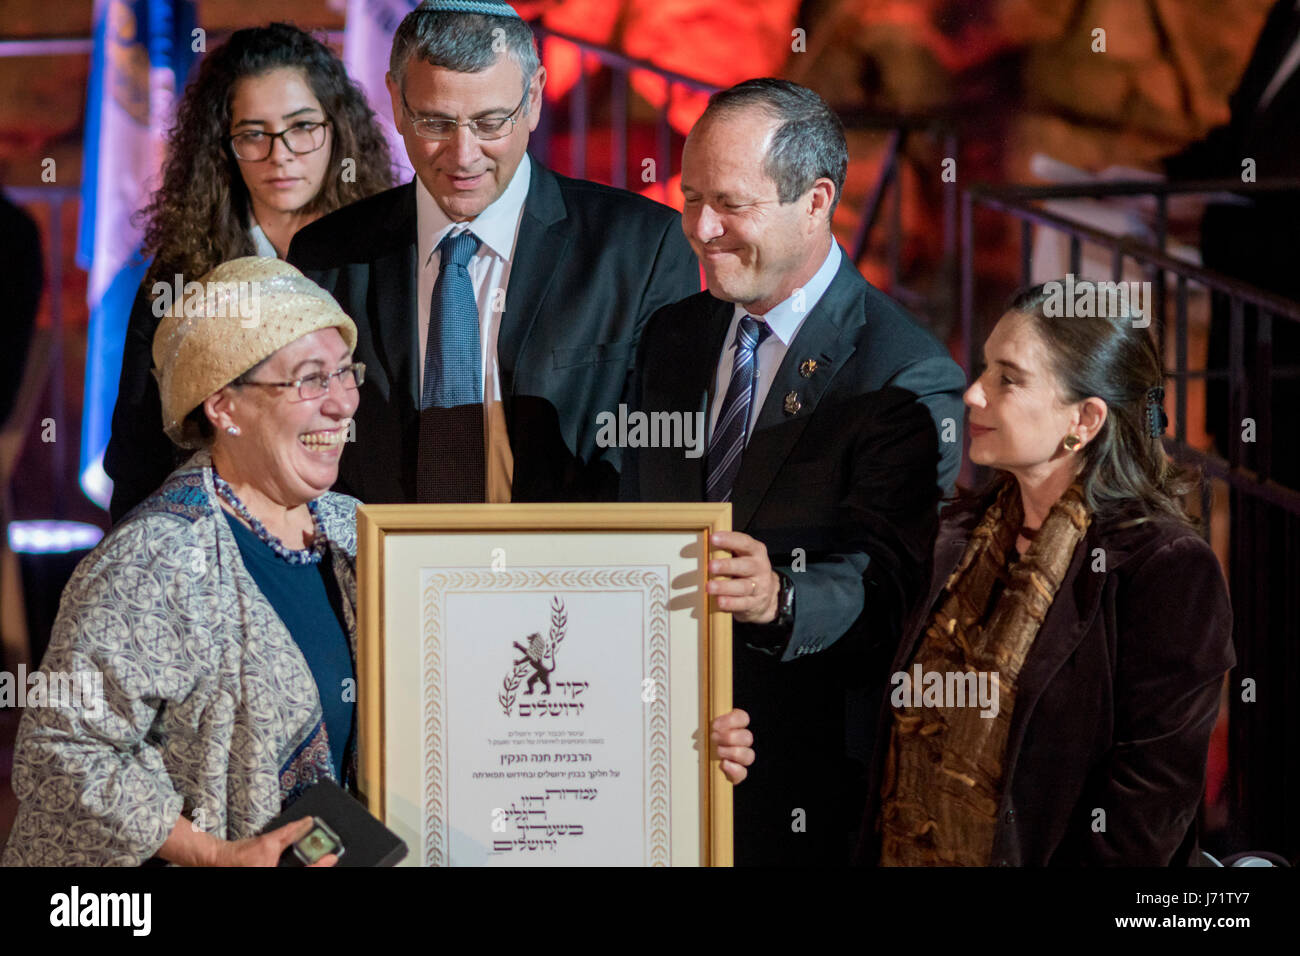 Jerusalem, Israel. 22nd May, 2017. L-R: Rabbi Benni Lau, Jerusalem's Mayor Nir Barkat and Mrs. Ora Achimeir present Channa Henkin with a certificate of merit during the annual event at the Tower of David, honoring examplary citizens of Jerusalem. Credit: Yagil Henkin/Alamy Live News Stock Photo